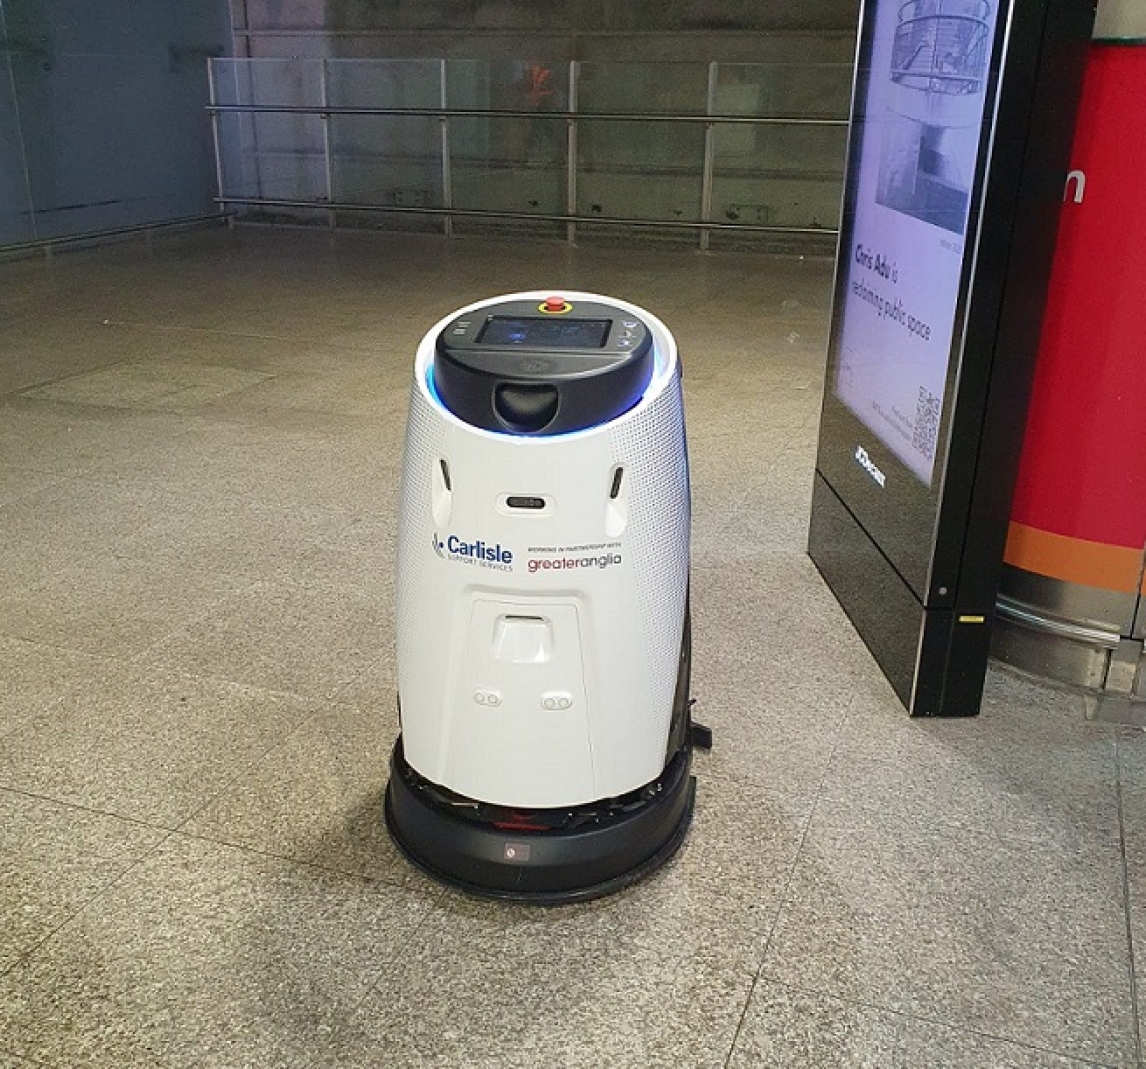 Auto scrubber at Stansted airport